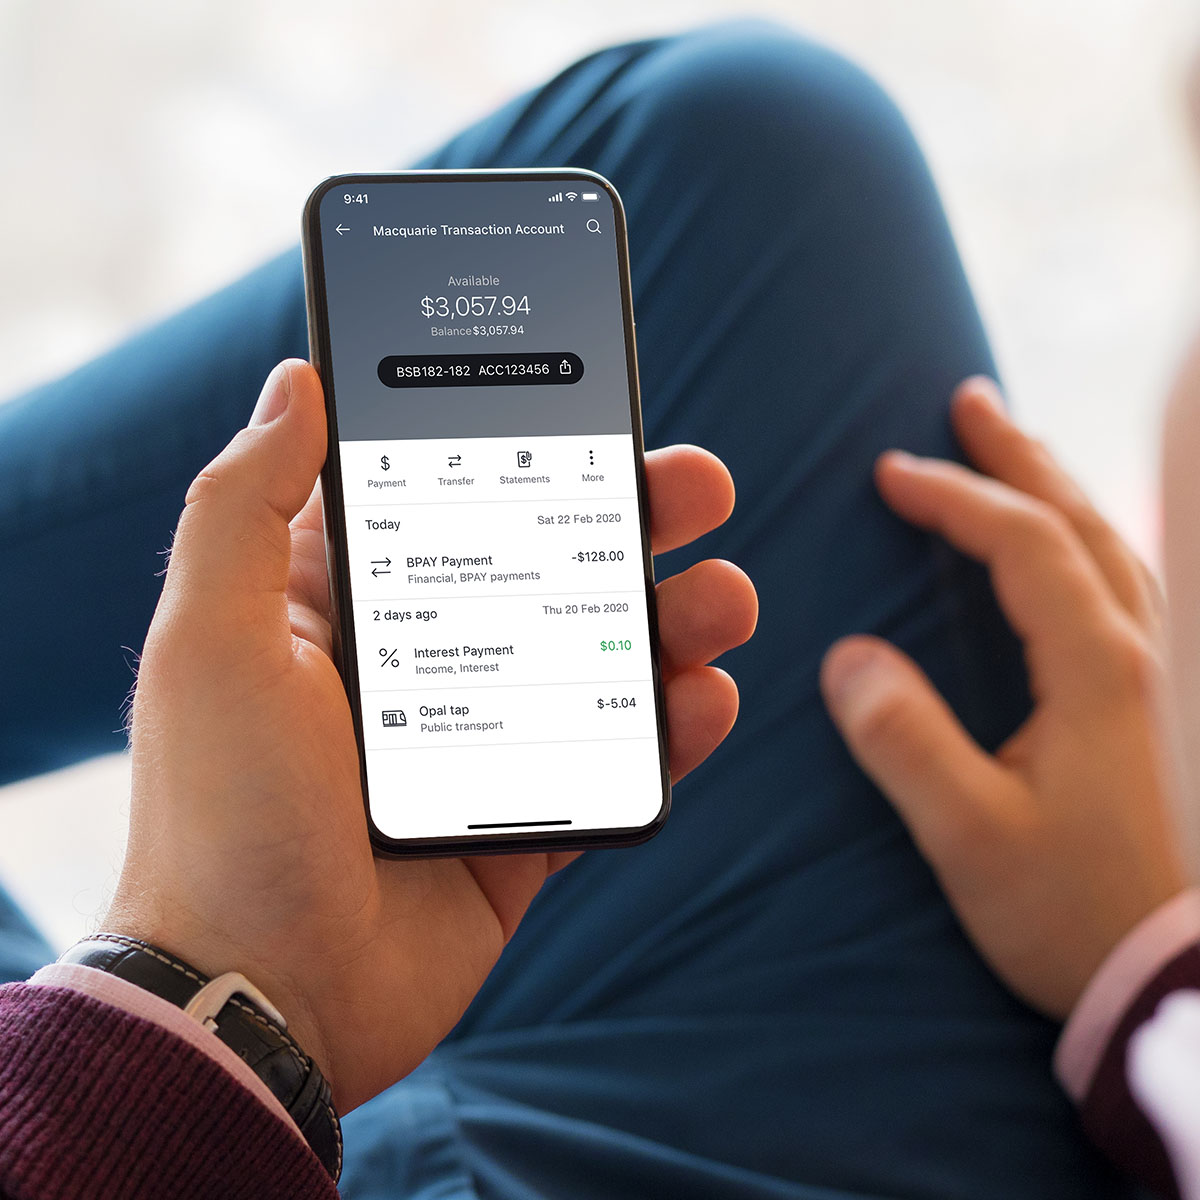 A man lounging back and using his smart phone with the Macquarie bank app open on a transactions screen